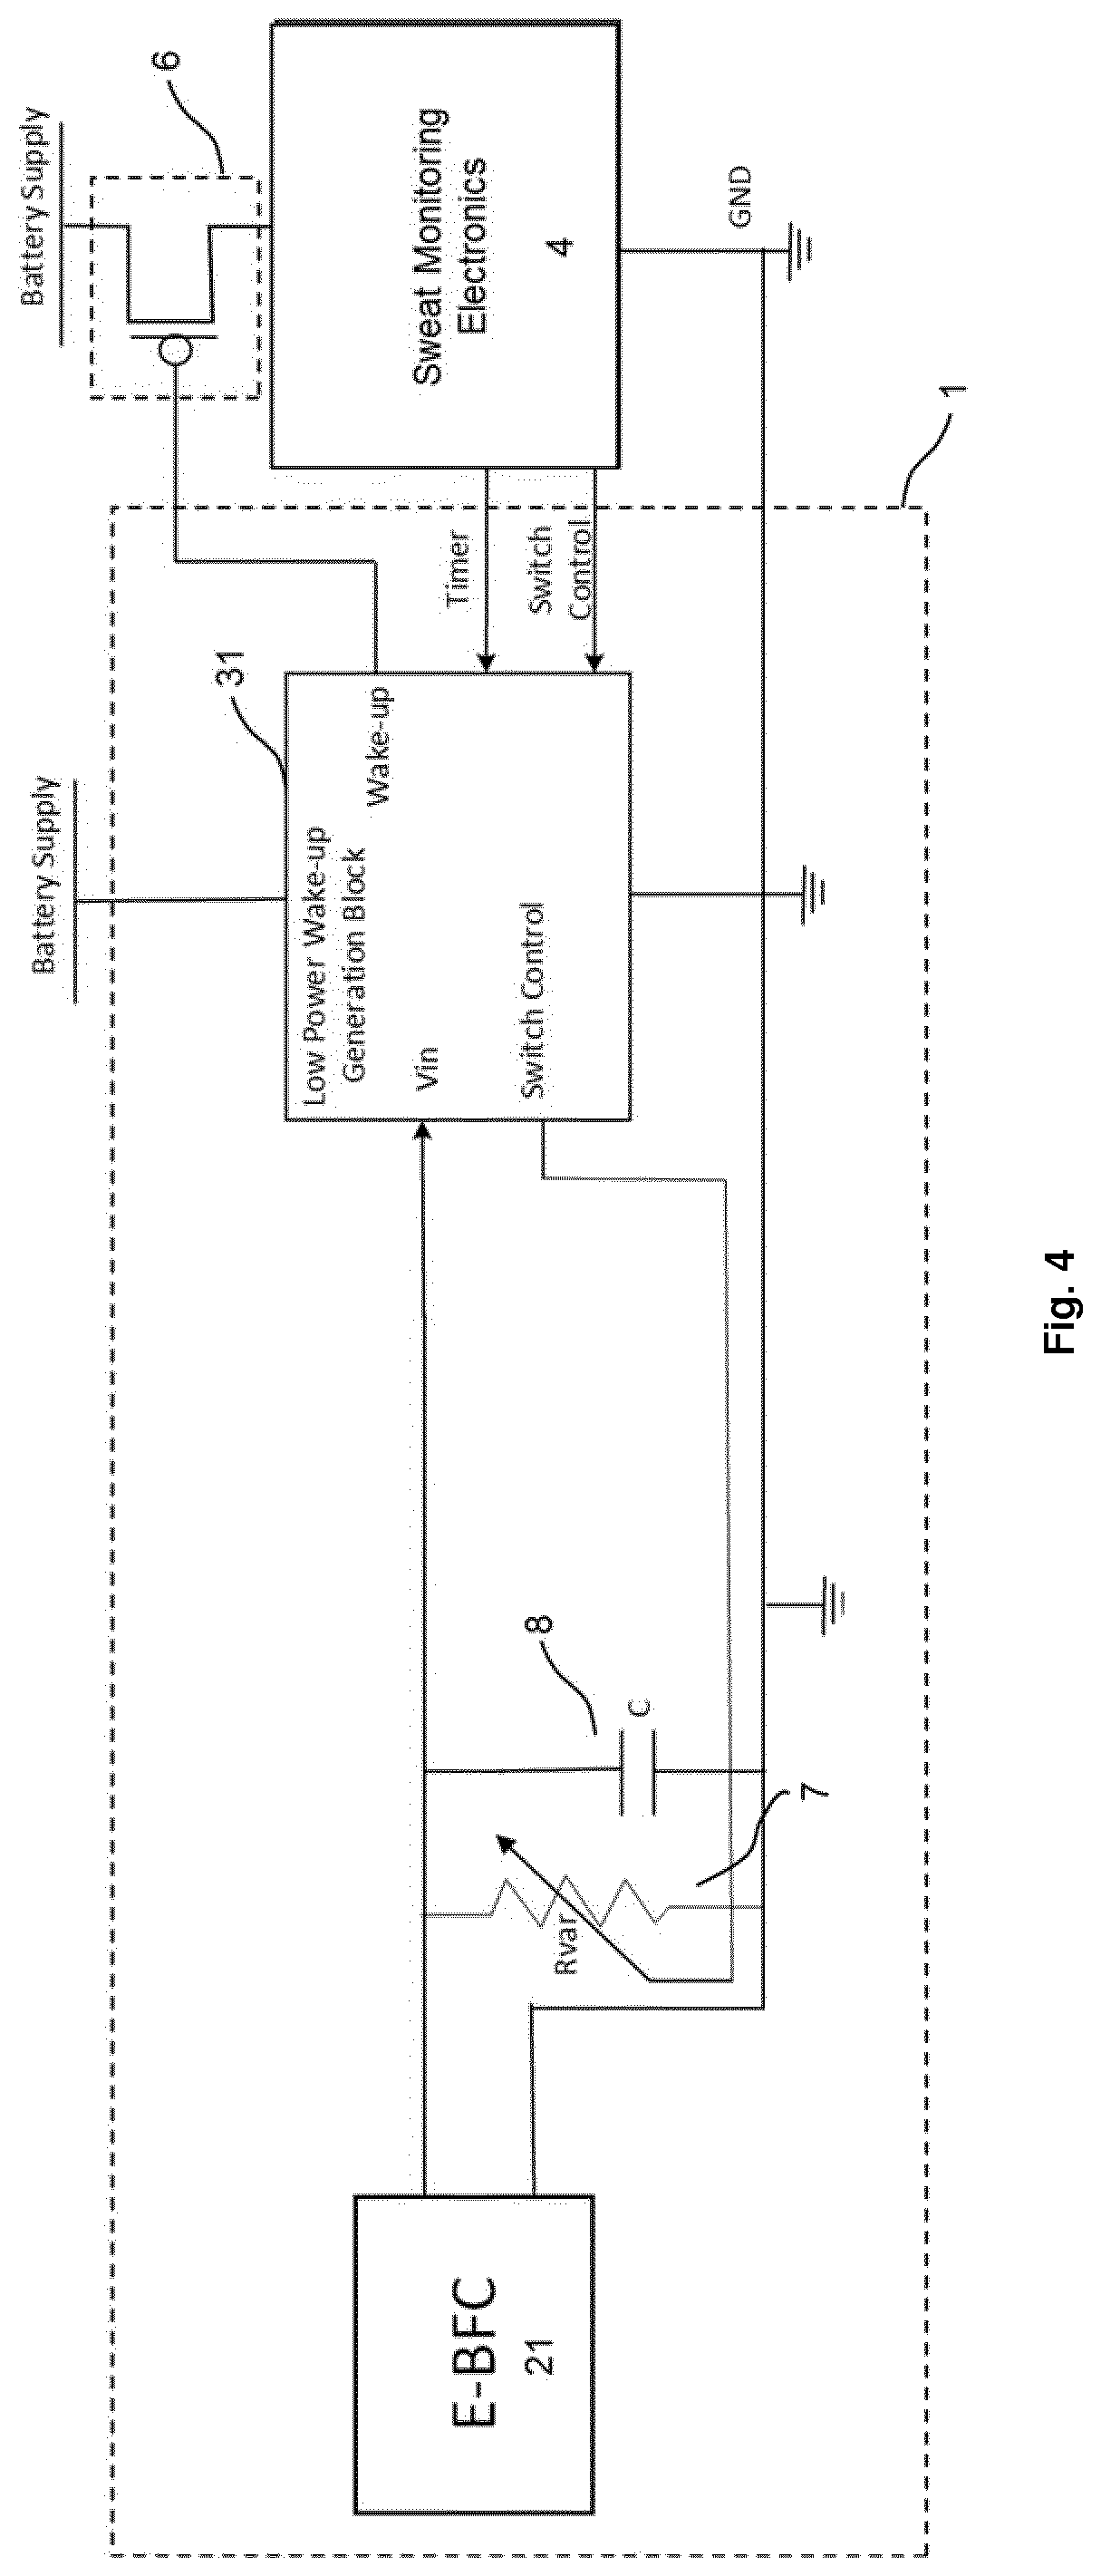 Switch circuitry for a fluid monitoring device